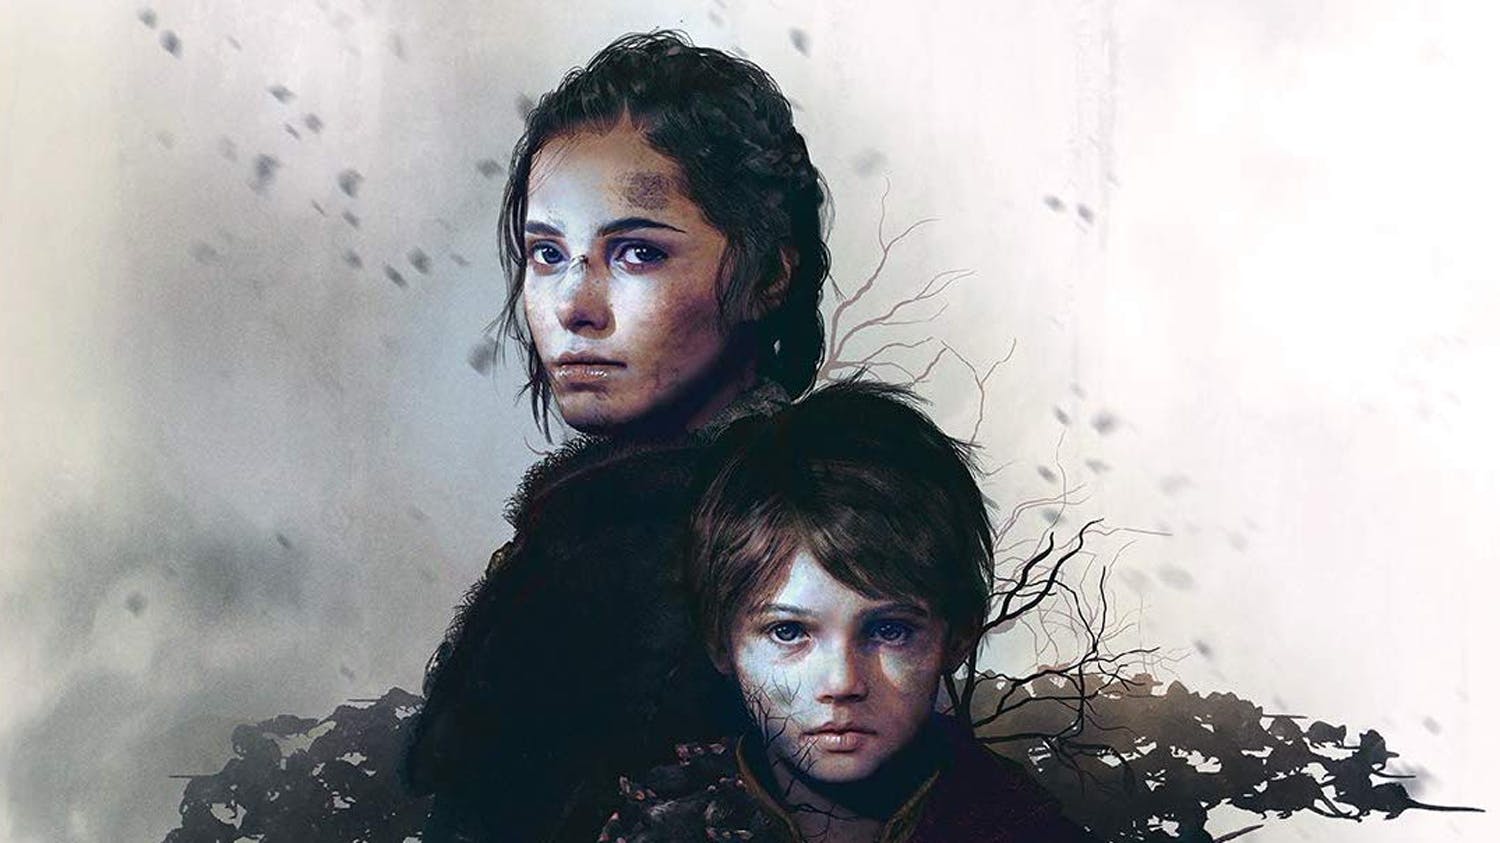 A Plague Tale: Innocence's resonance into today's plague-filled world – I  Need Diverse Games